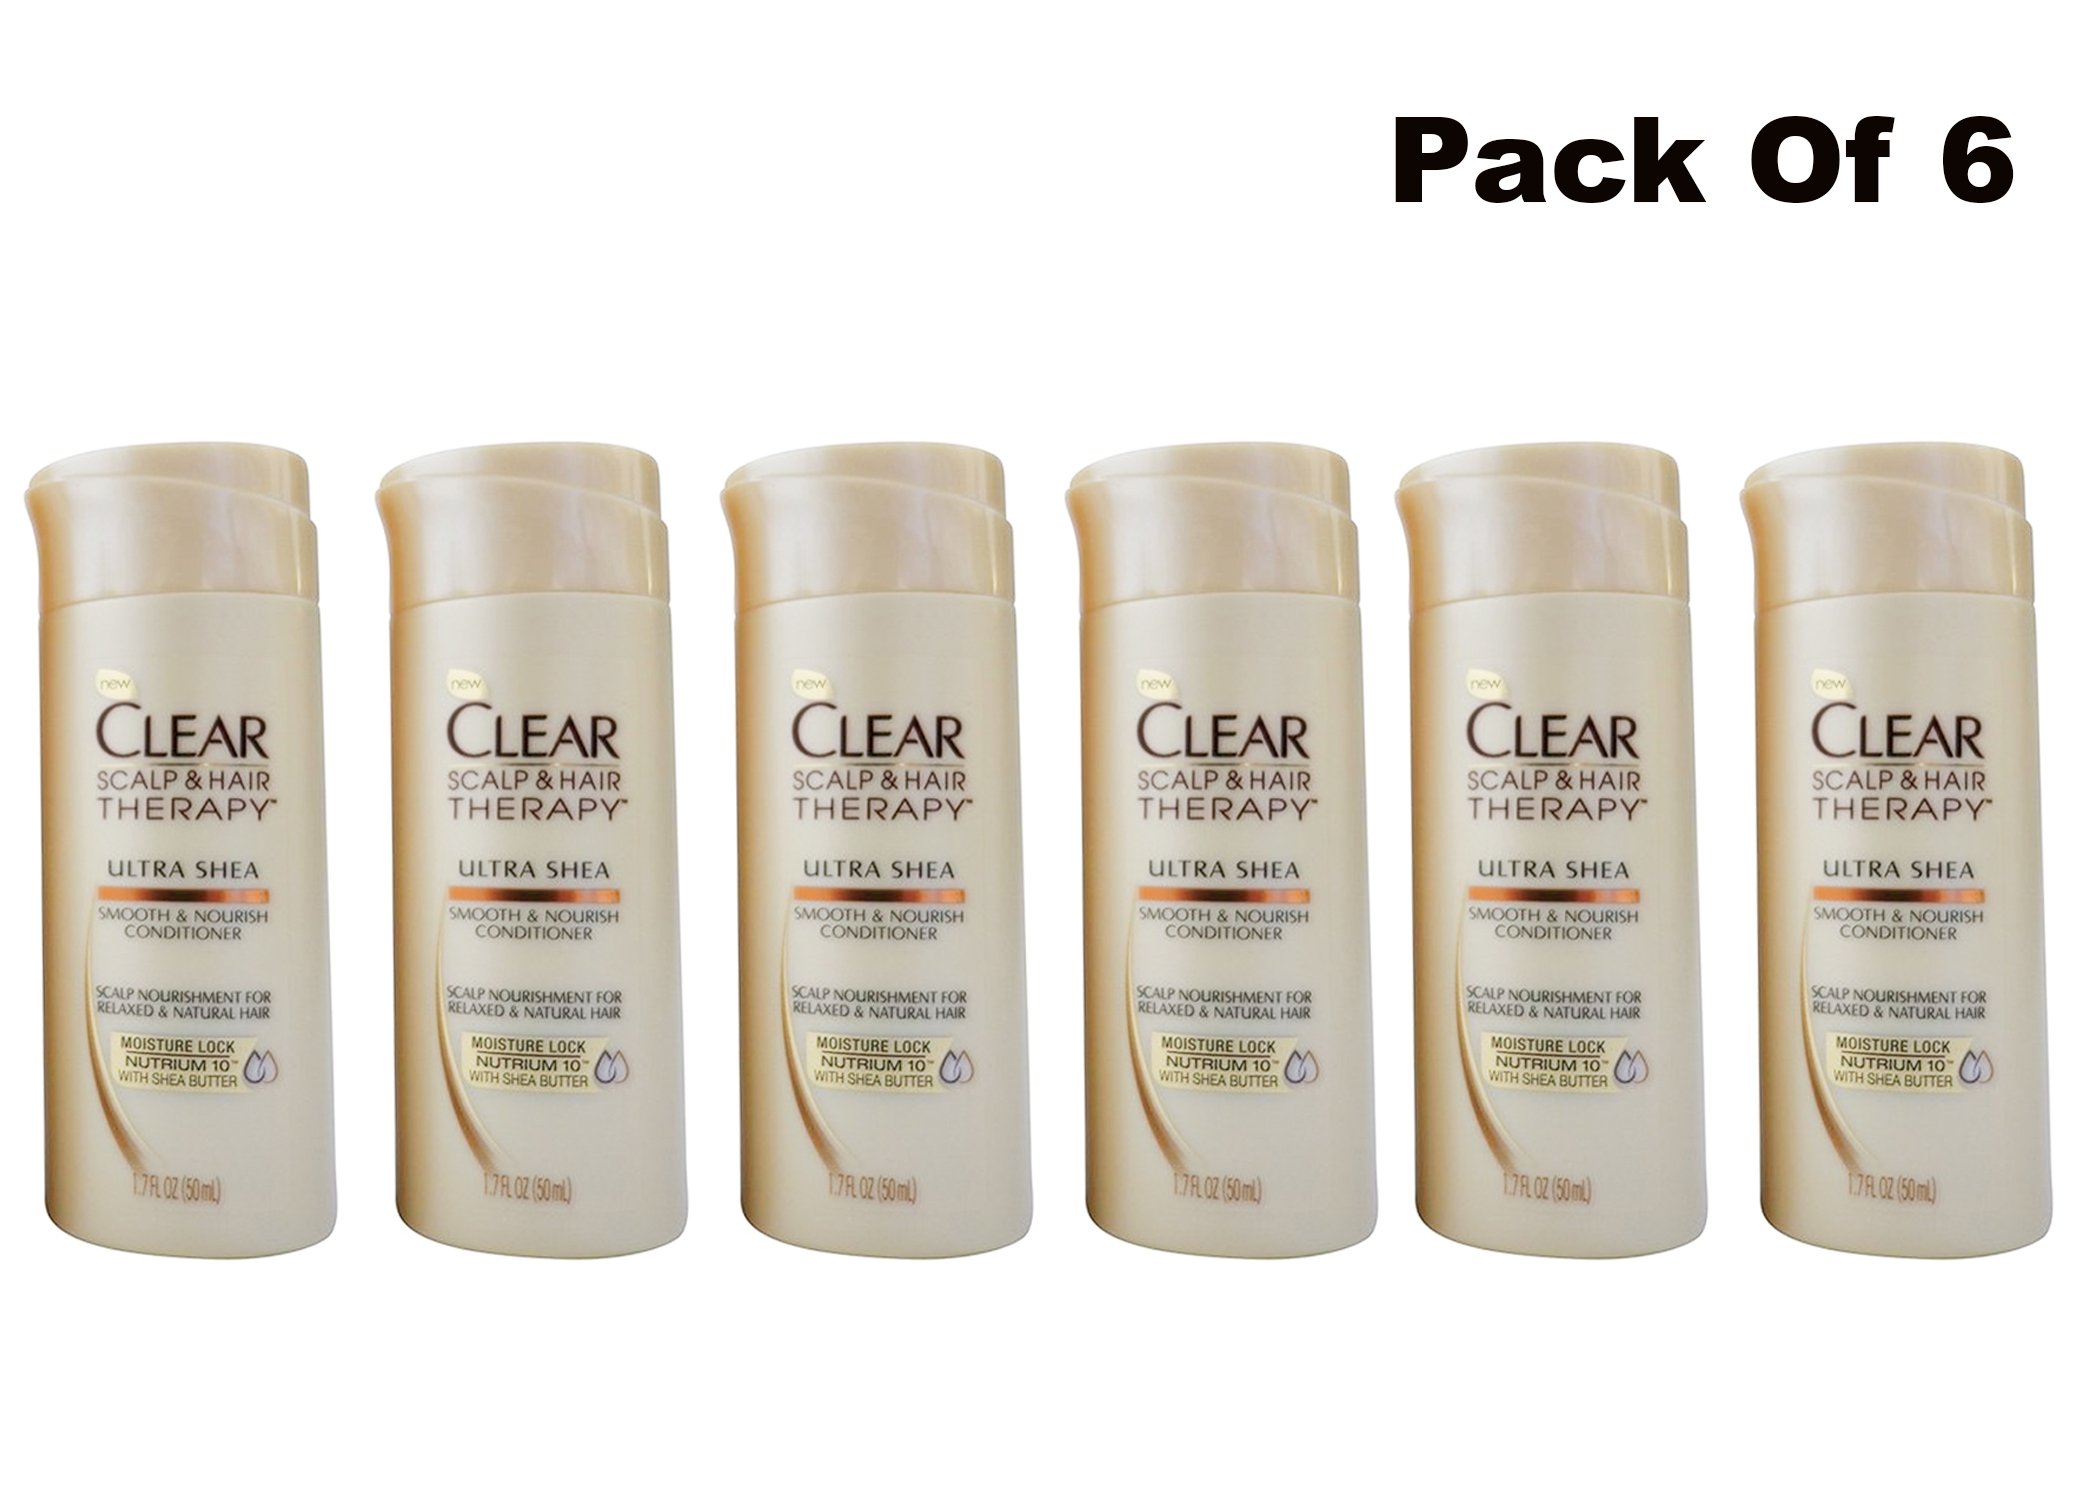 Clear Scalp & Hair Therapy Shea Smooth & Nourish Conditioner 1.7 fl oz 6 Pack - image 1 of 1